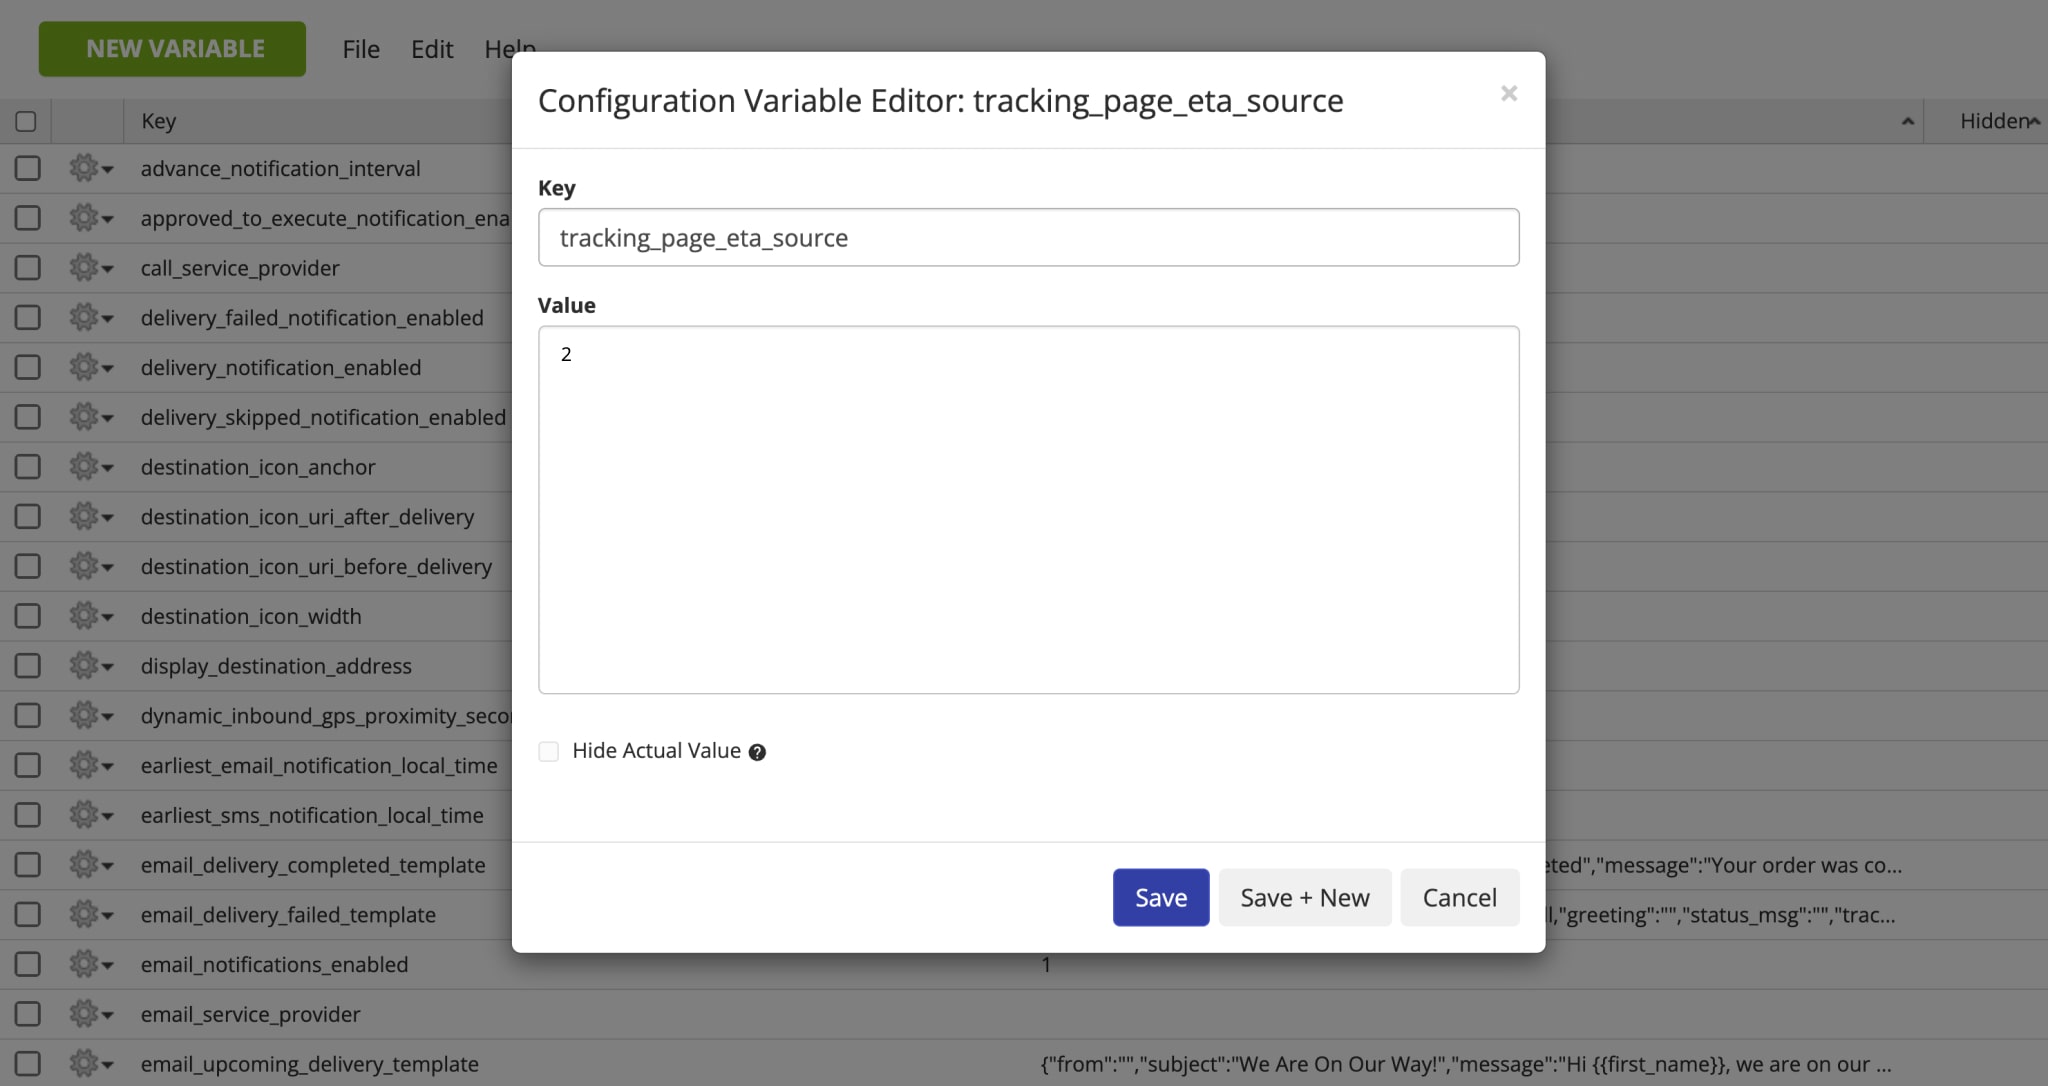 Use Route4Me's Advanced Configuration Editor to add Predicted Arrival Time to the Tracking Page.